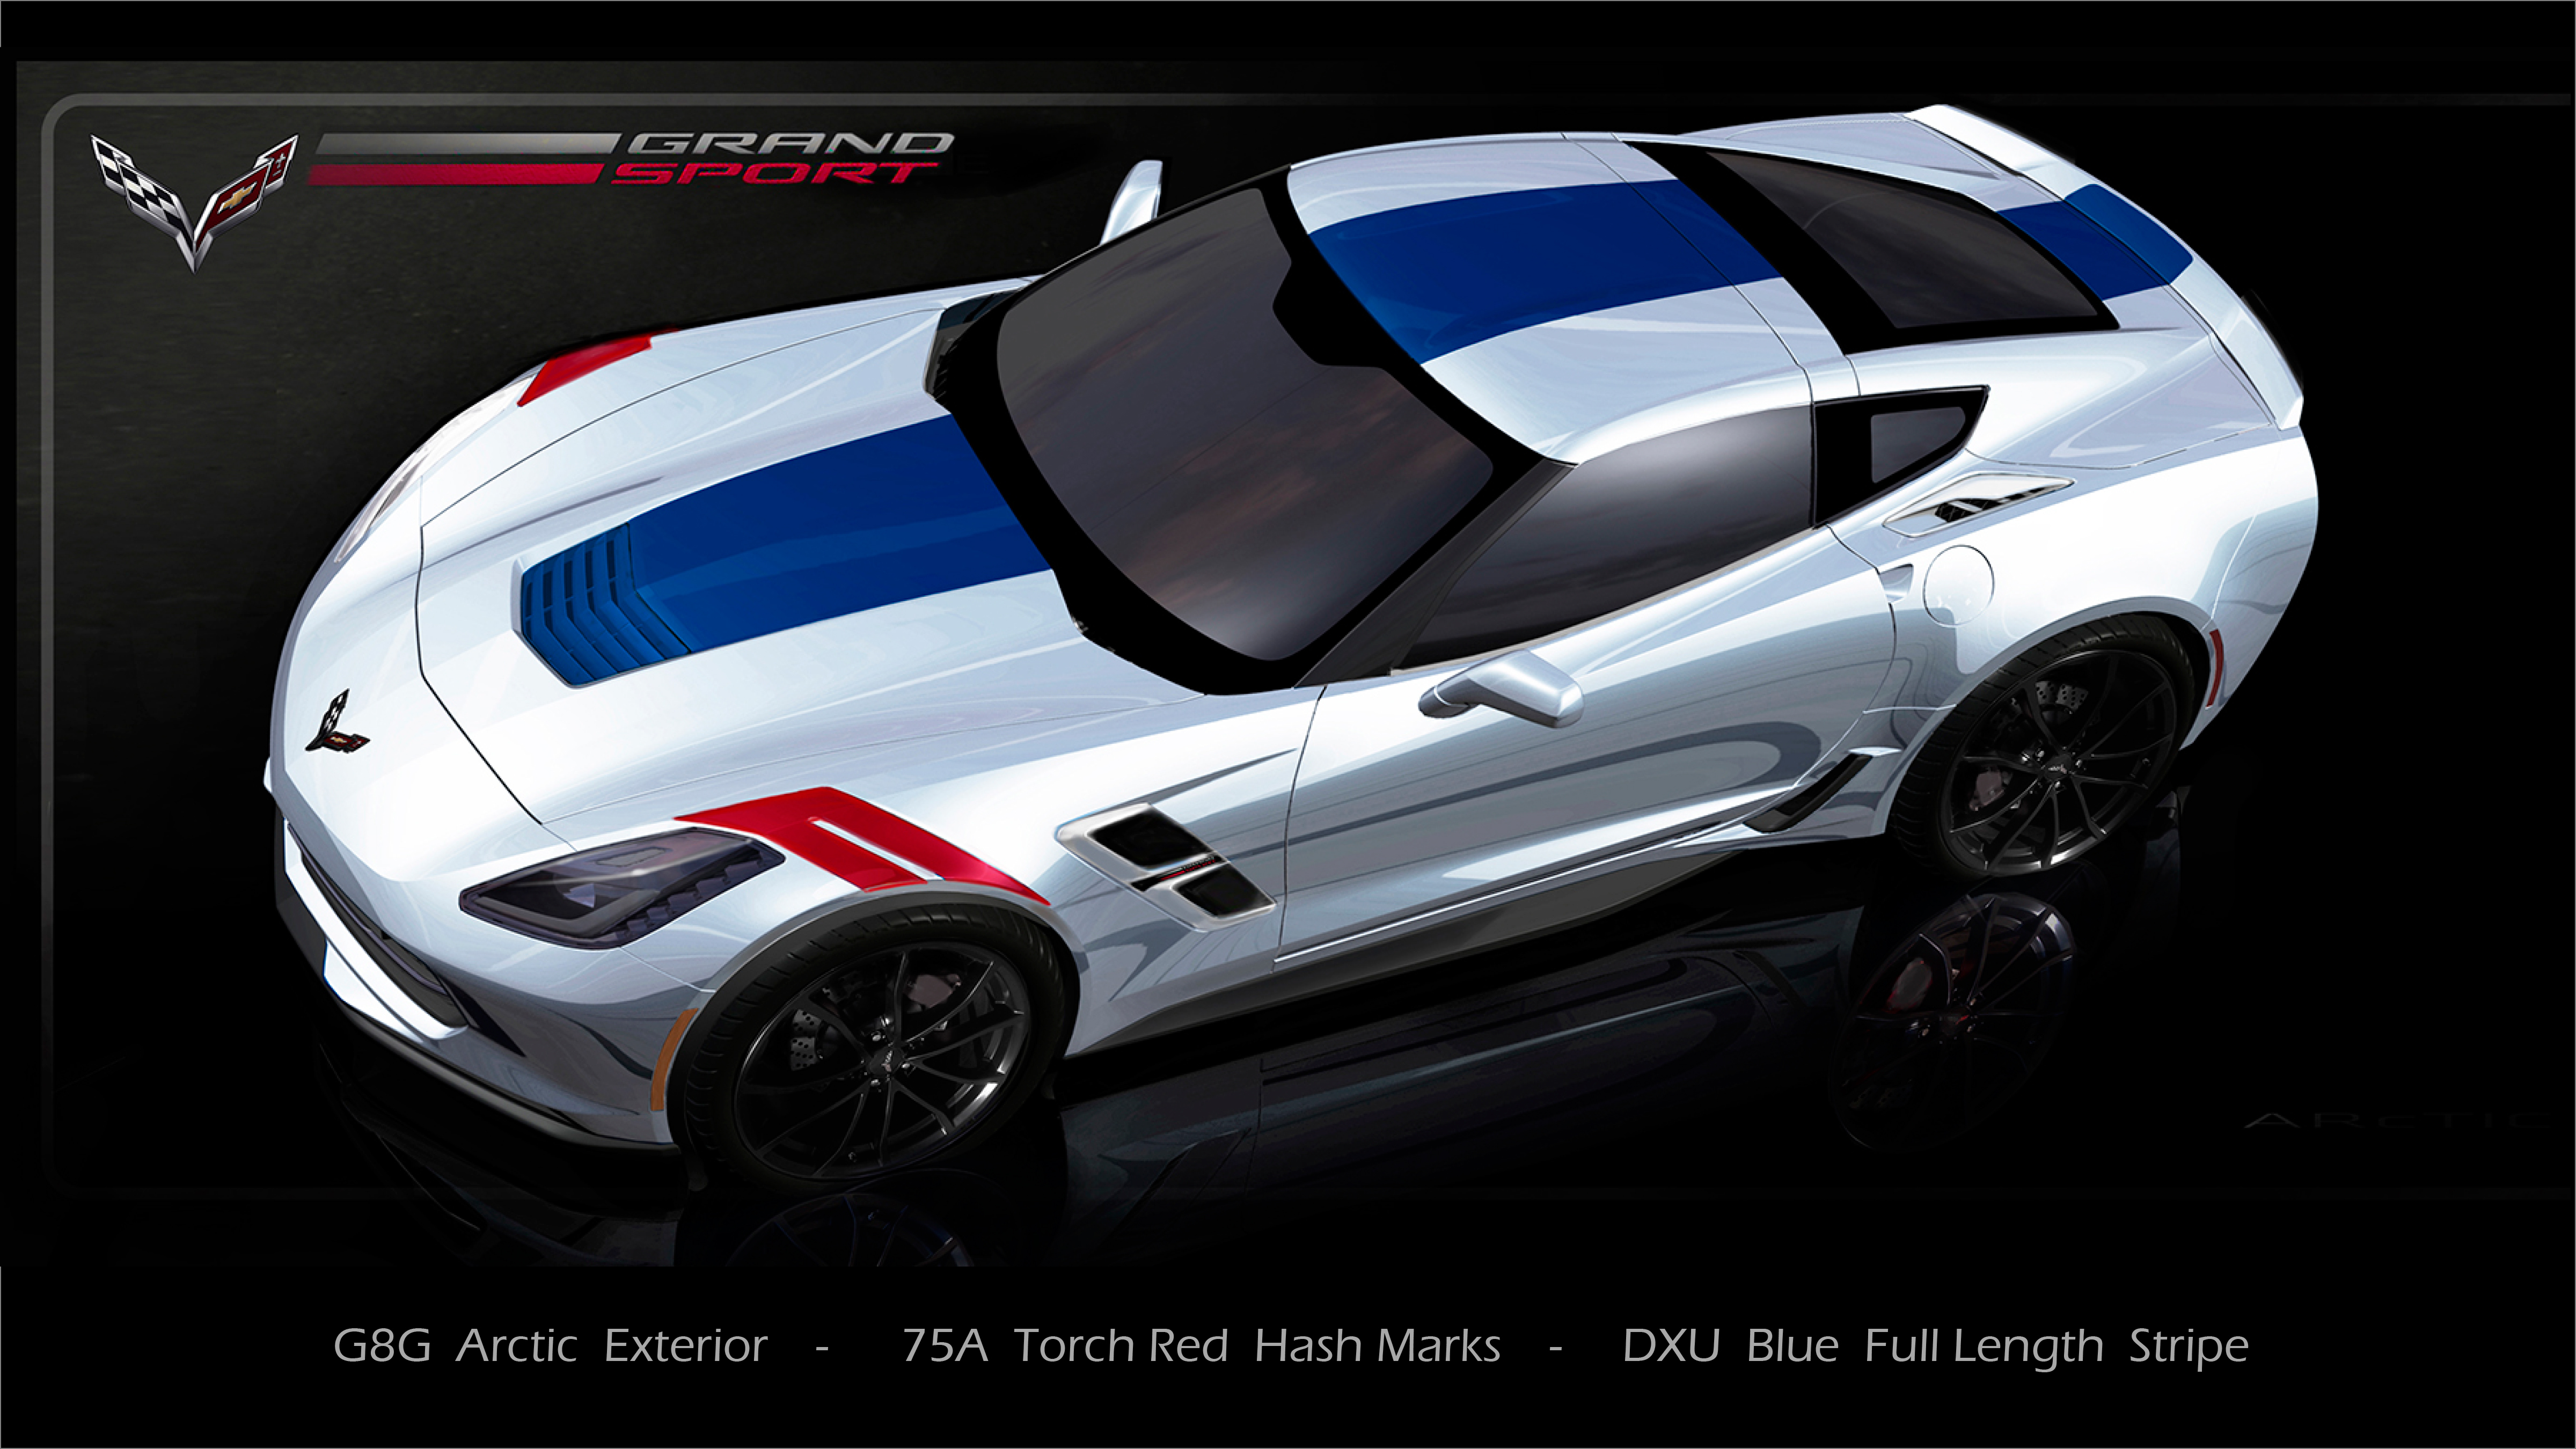 2017 Corvette Grand Sport Colors - 10 out of 360 Choices